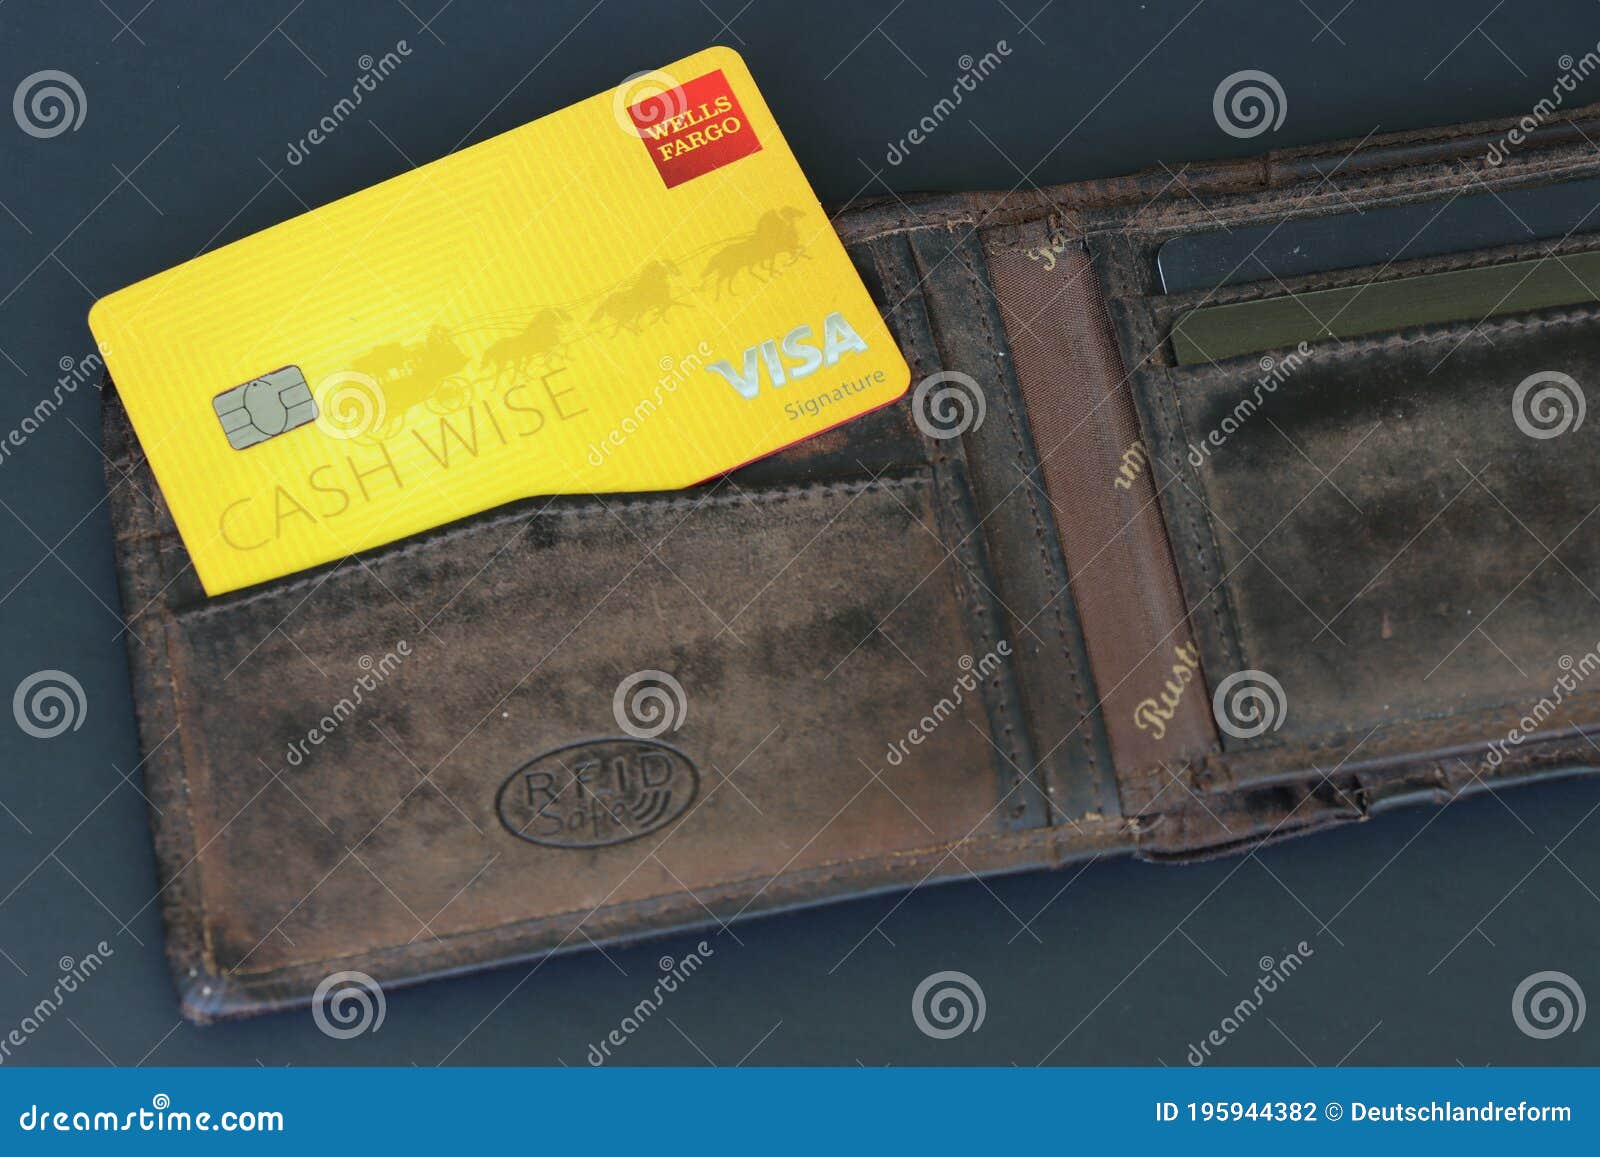 Dark Leather Wallet with Yellow Cash Wise Visa Credit Card Issued